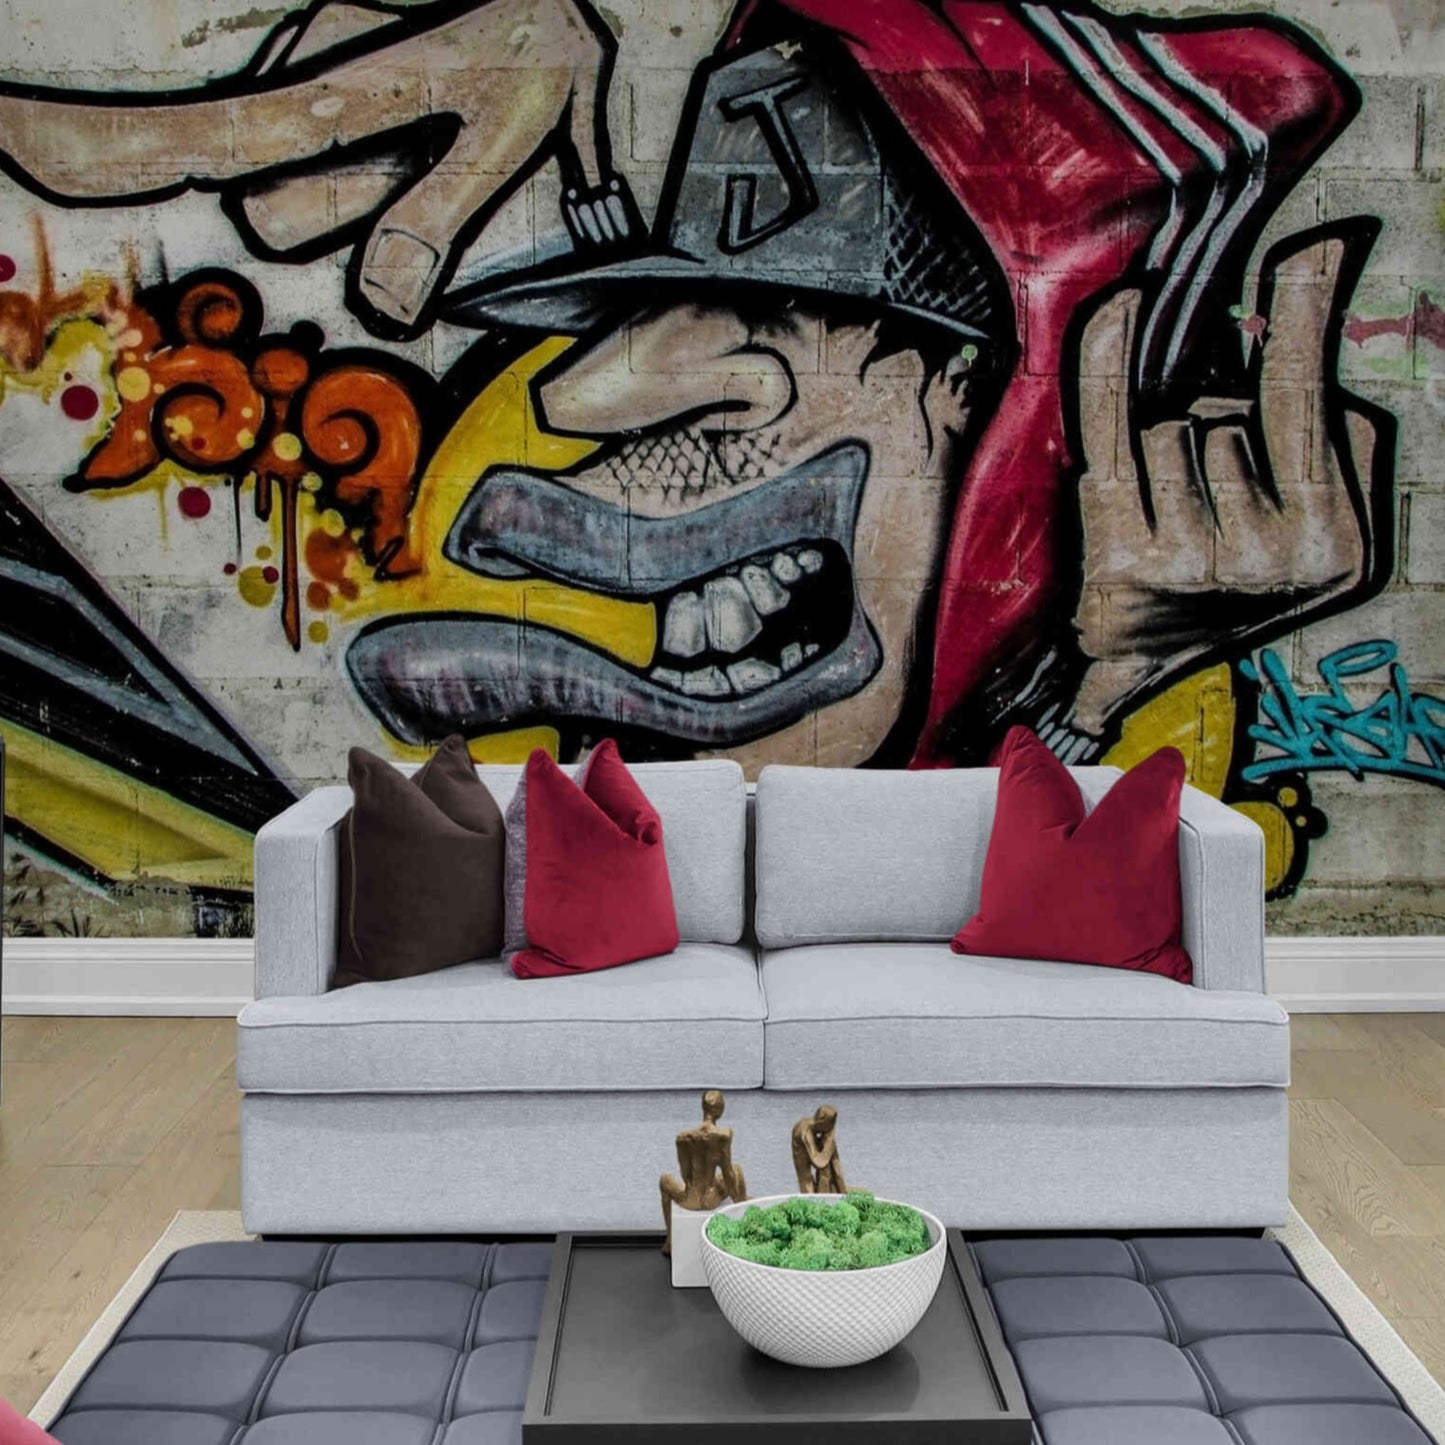 The essence of rap music captured in an urban beats graffiti wall mural, perfect for music enthusiasts.